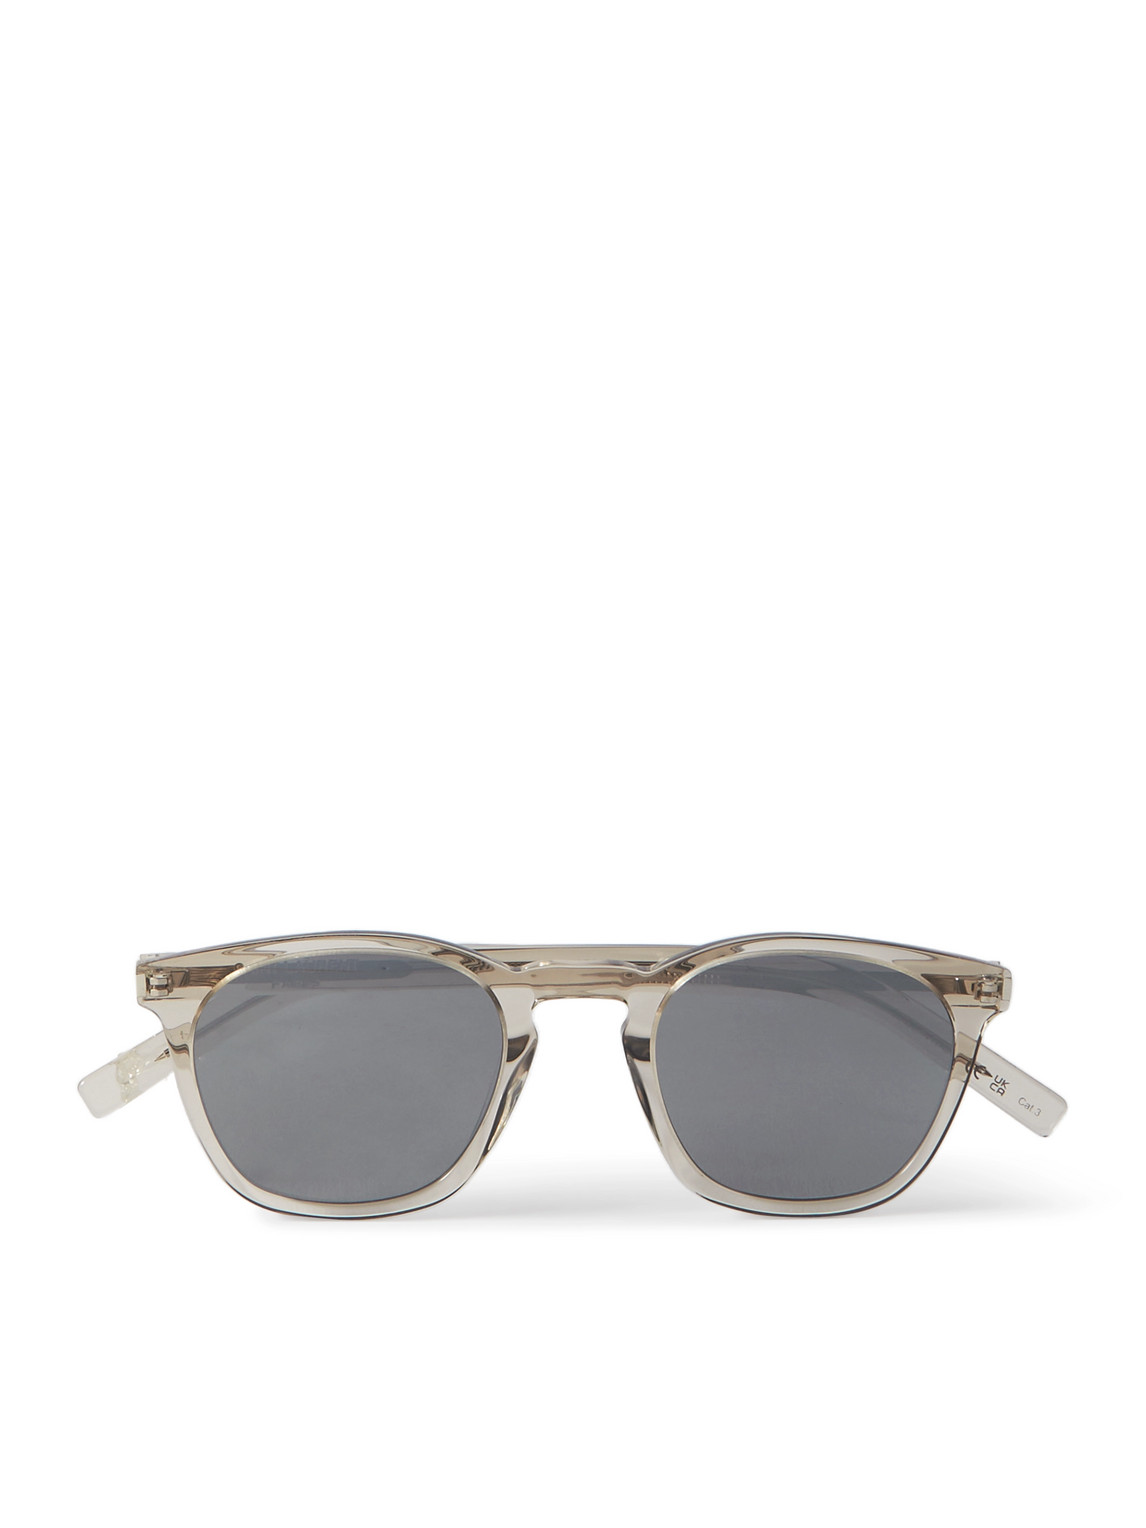 Saint Laurent D-frame Acetate And Silver-tone Sunglasses In Neutral